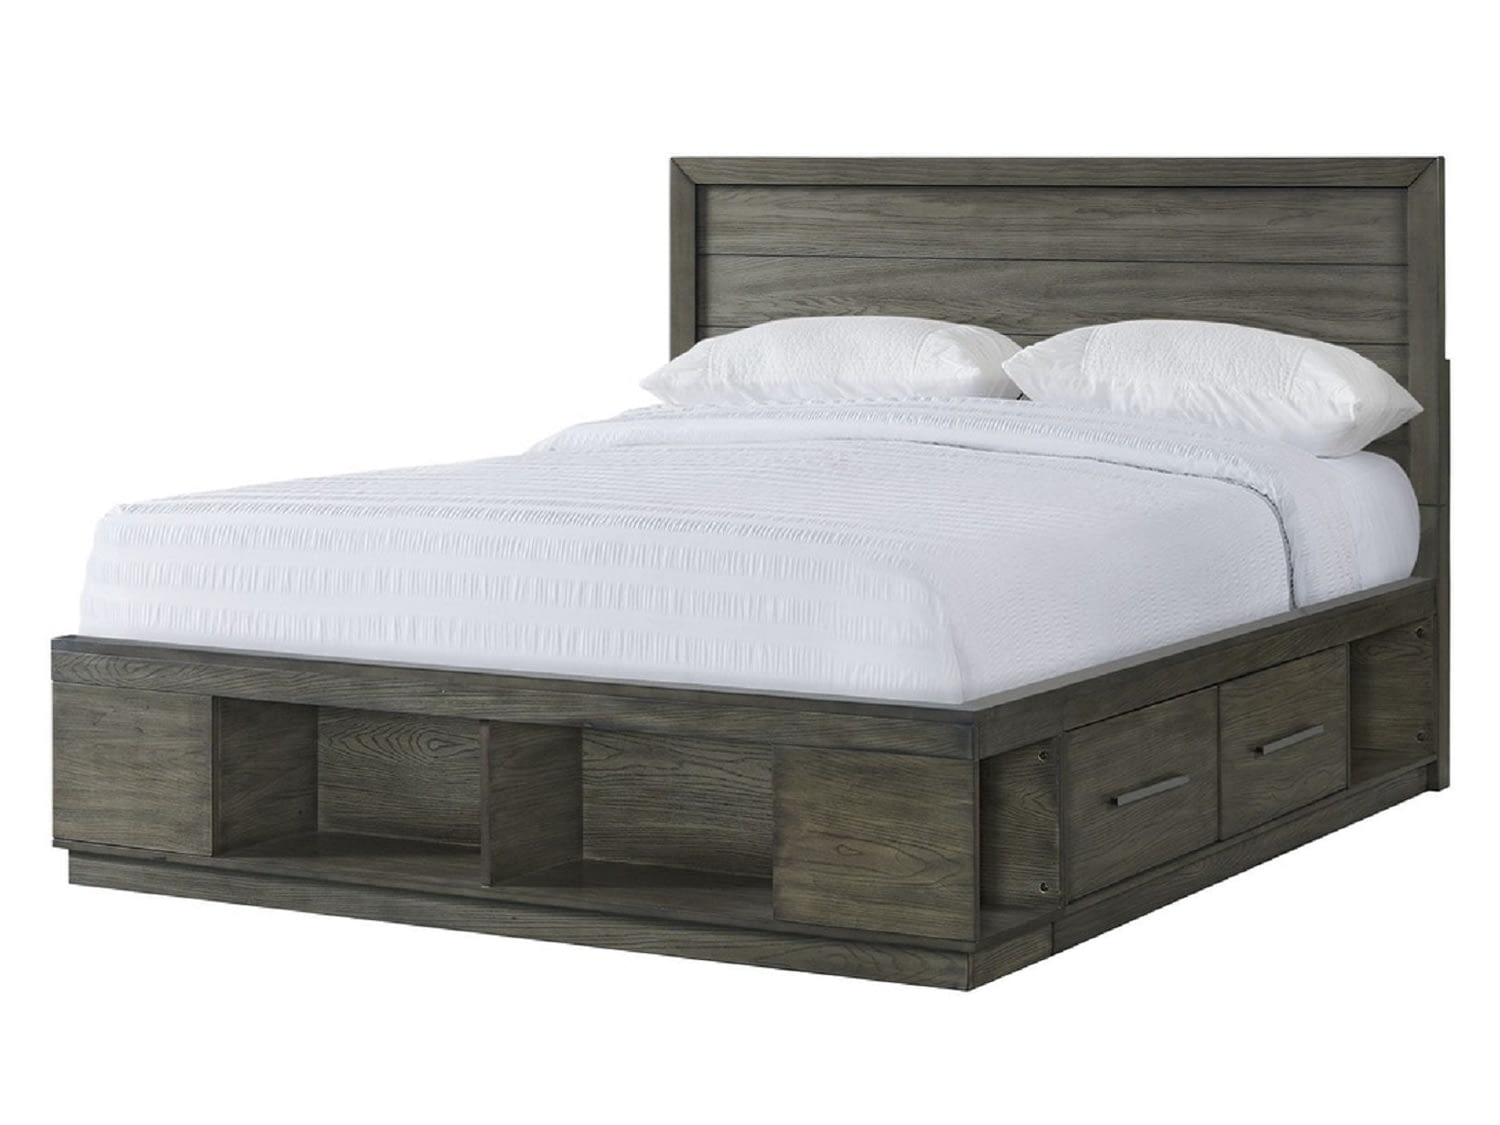 GENITO King Bed - Right Storage